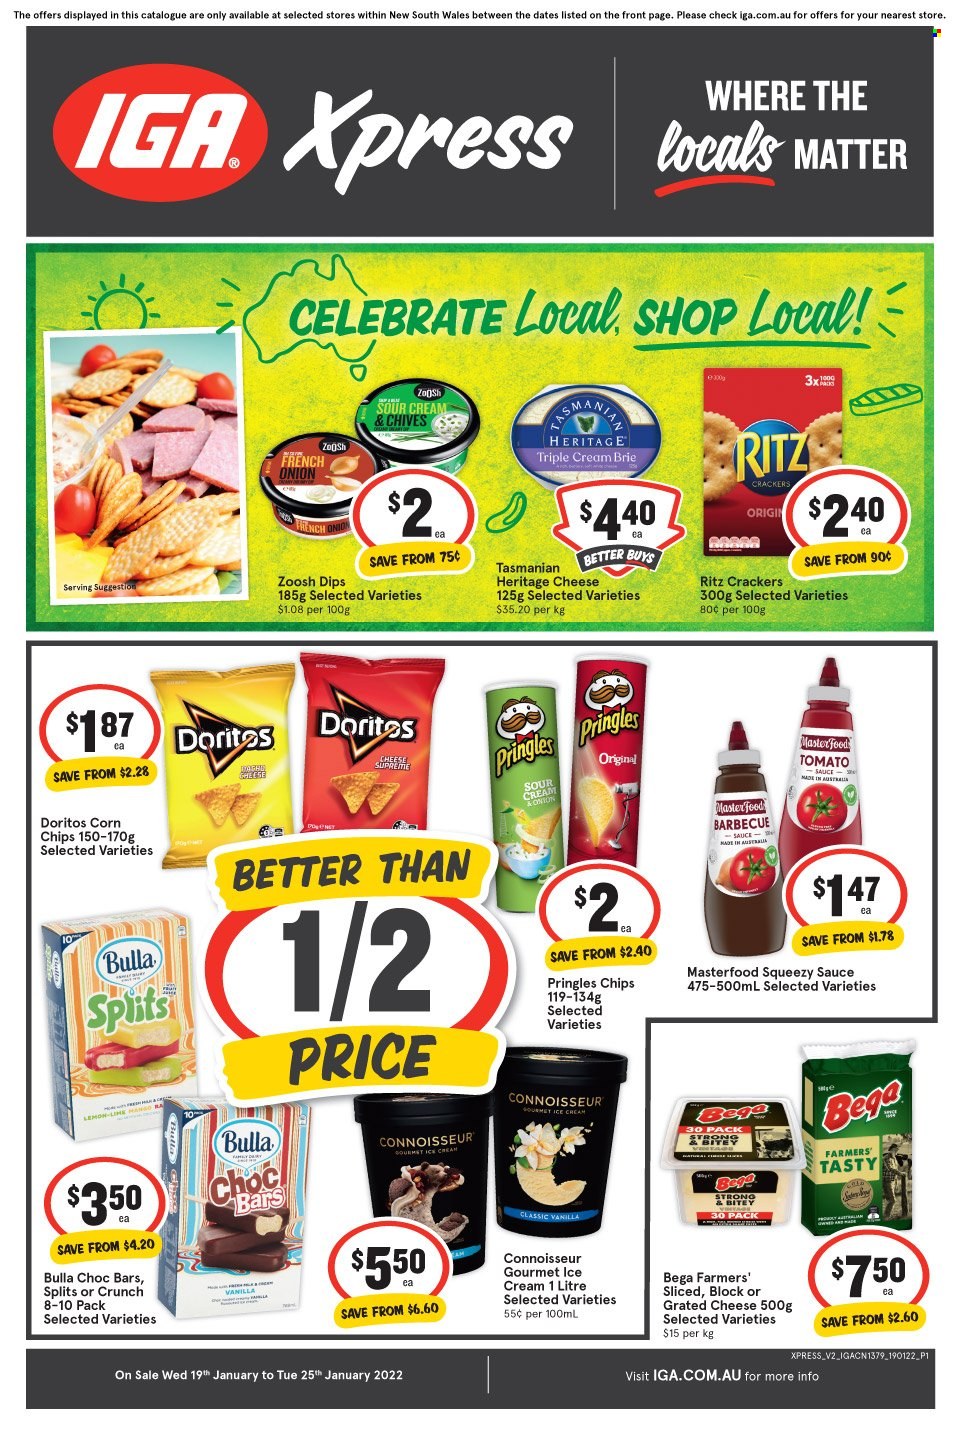 thumbnail - IGA Xpress Catalogue - 19 Jan 2022 - 25 Jan 2022 - Sales products - onion, chives, sauce, brie, Heritage cheese, grated cheese, Tasmanian Heritage, ice cream, crackers, RITZ, Doritos, Pringles, chips, corn chips, ZoOsh. Page 1.